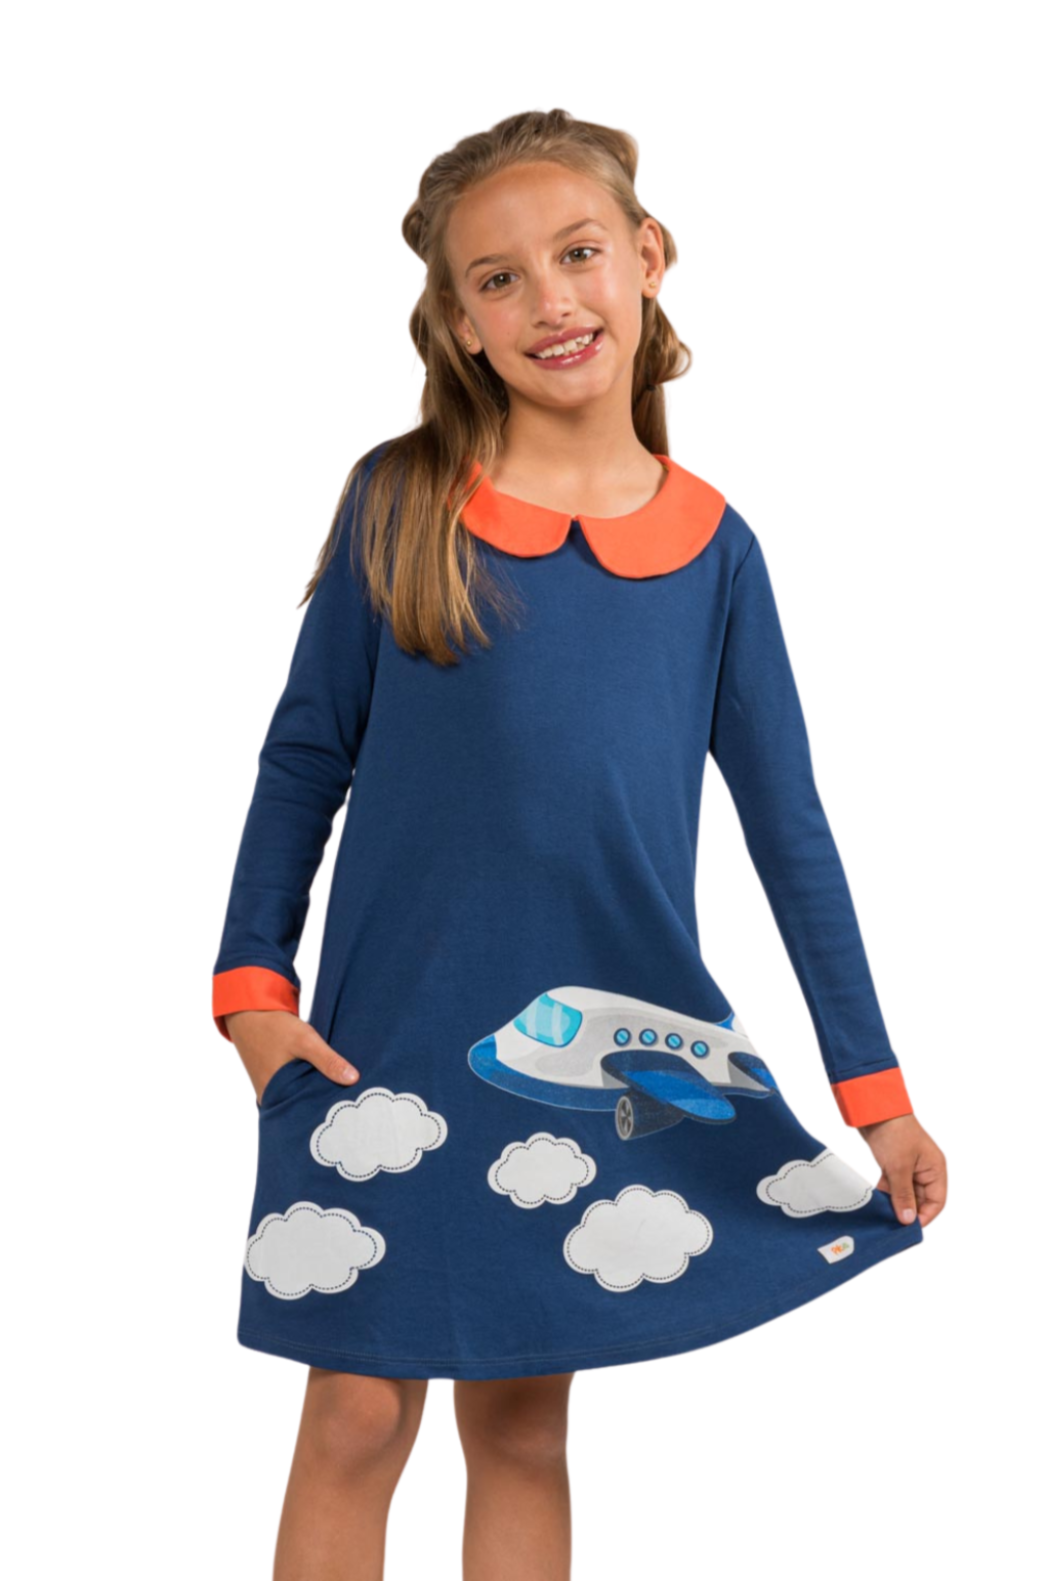 Airplane dress, STEM and non-Stereotypical designs- Prisma Kiddos - Children Fashion - dress with pockets